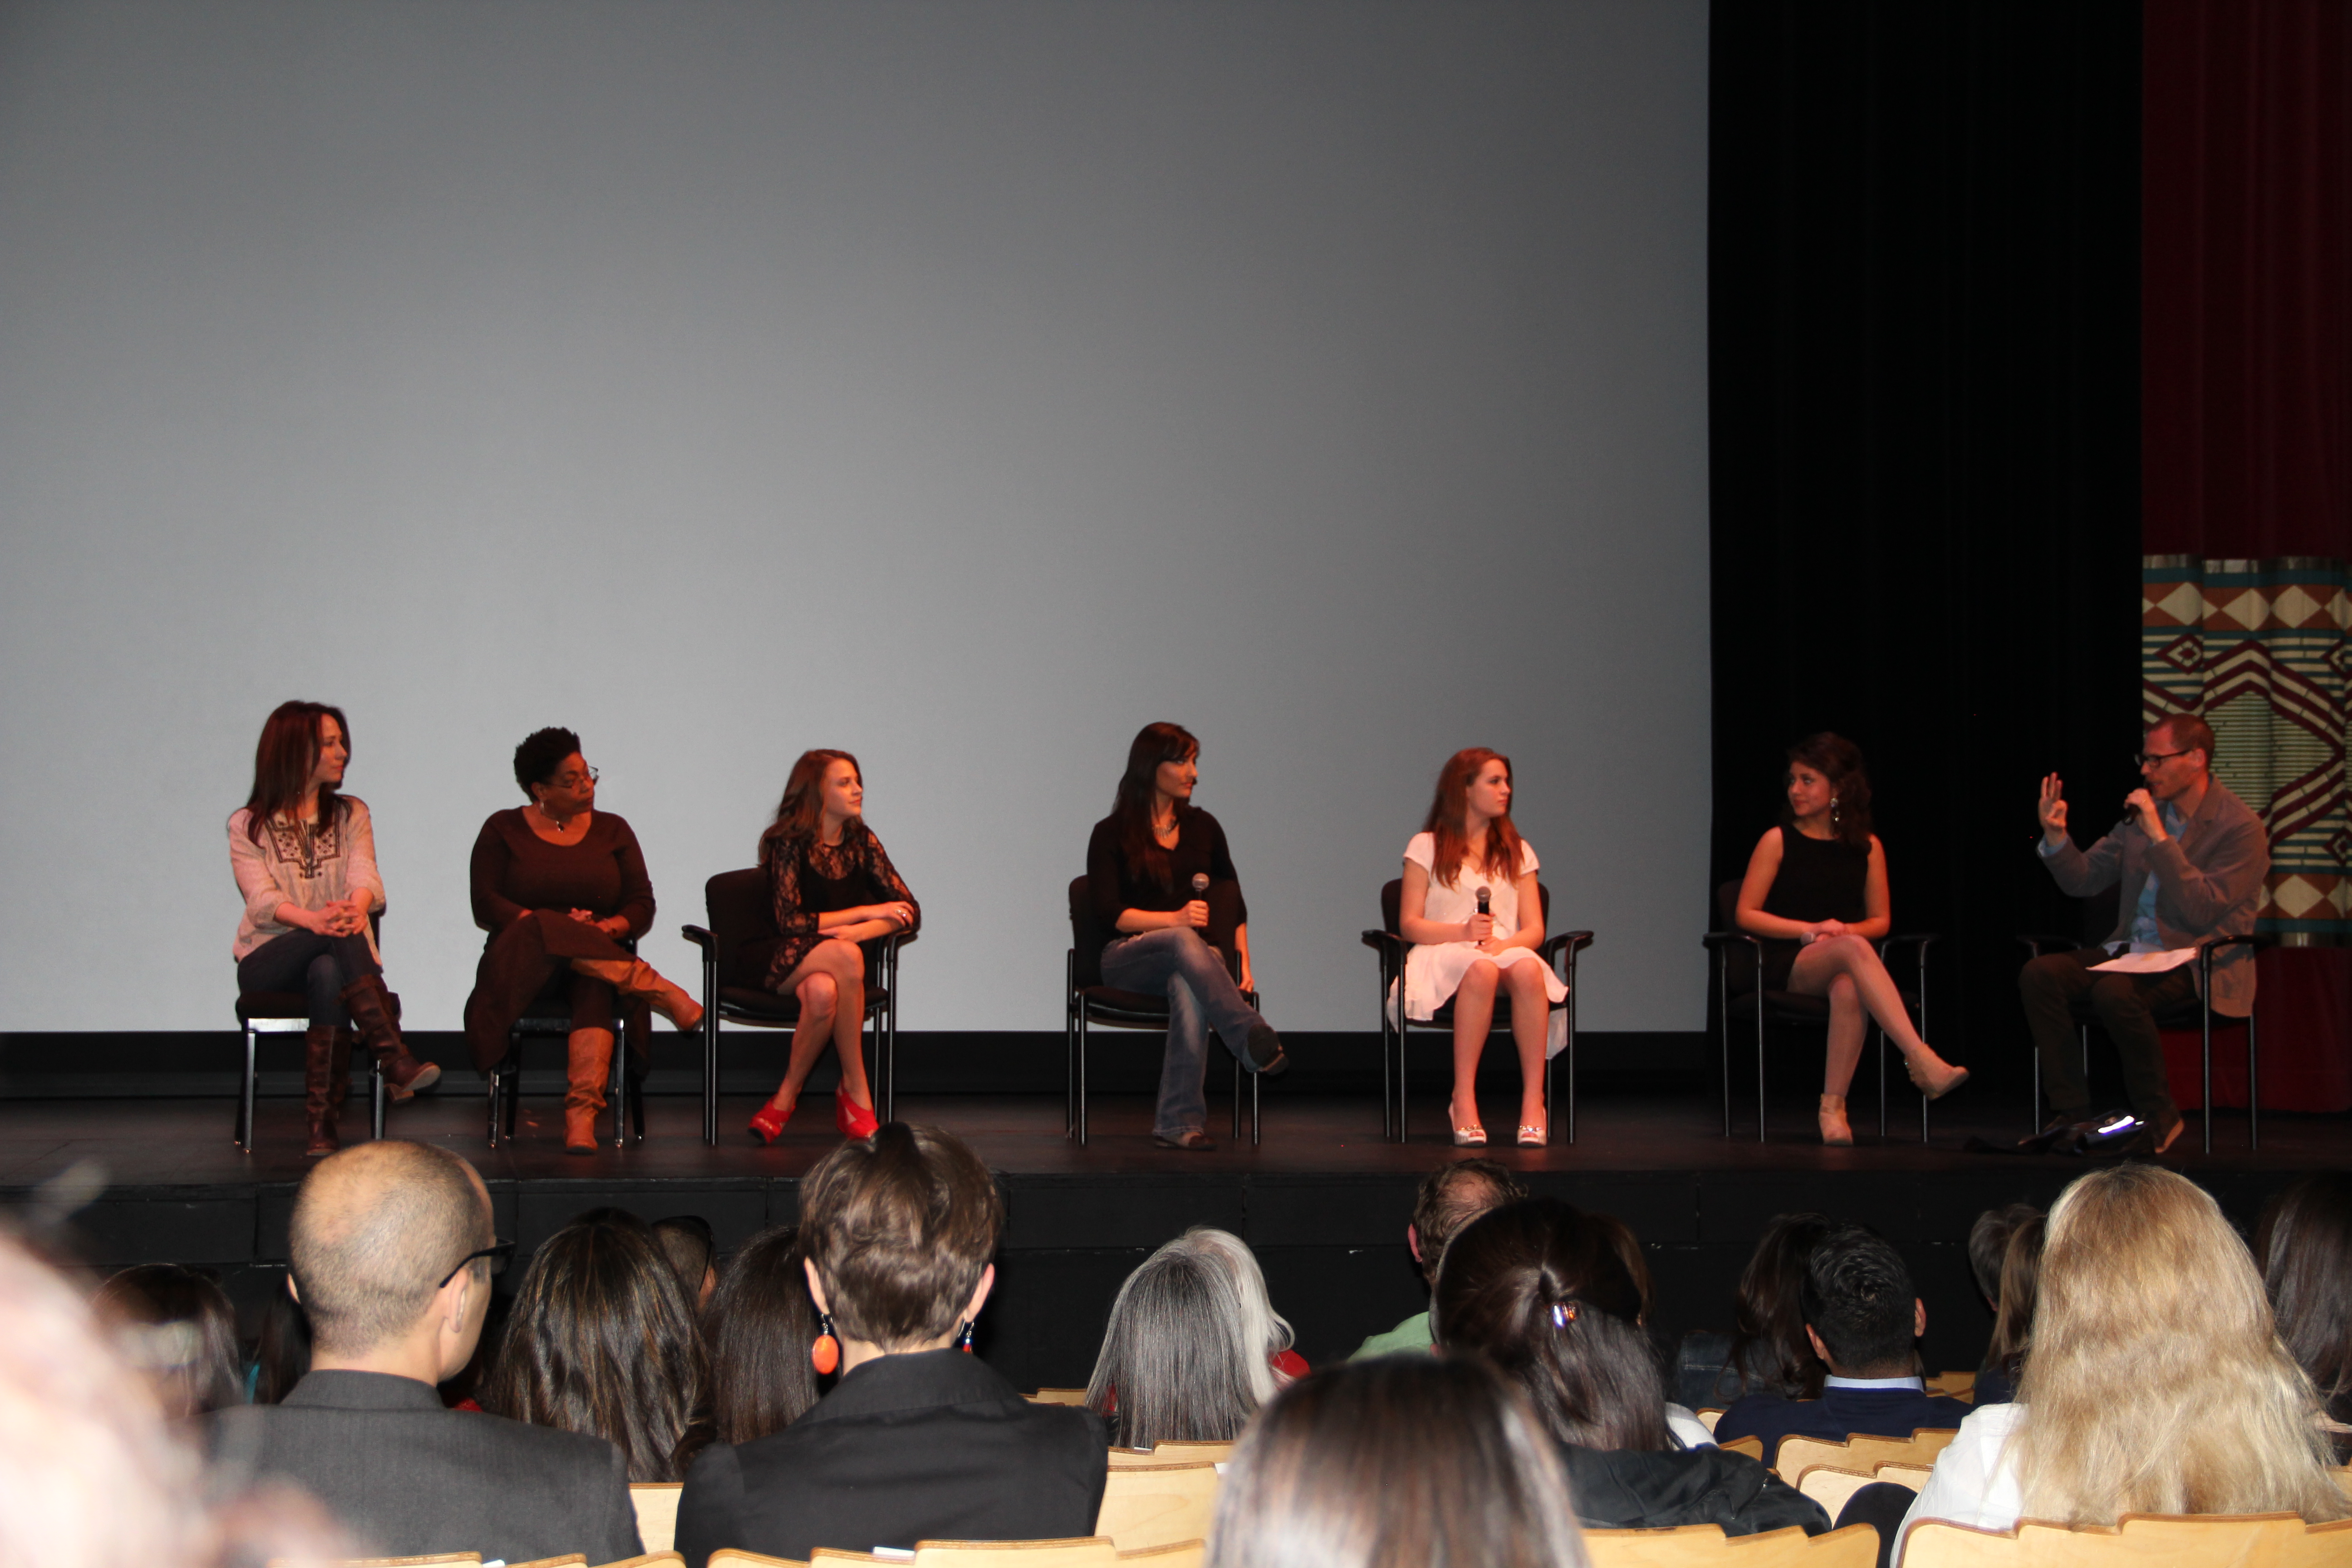 Panel discussion with cast of Cents